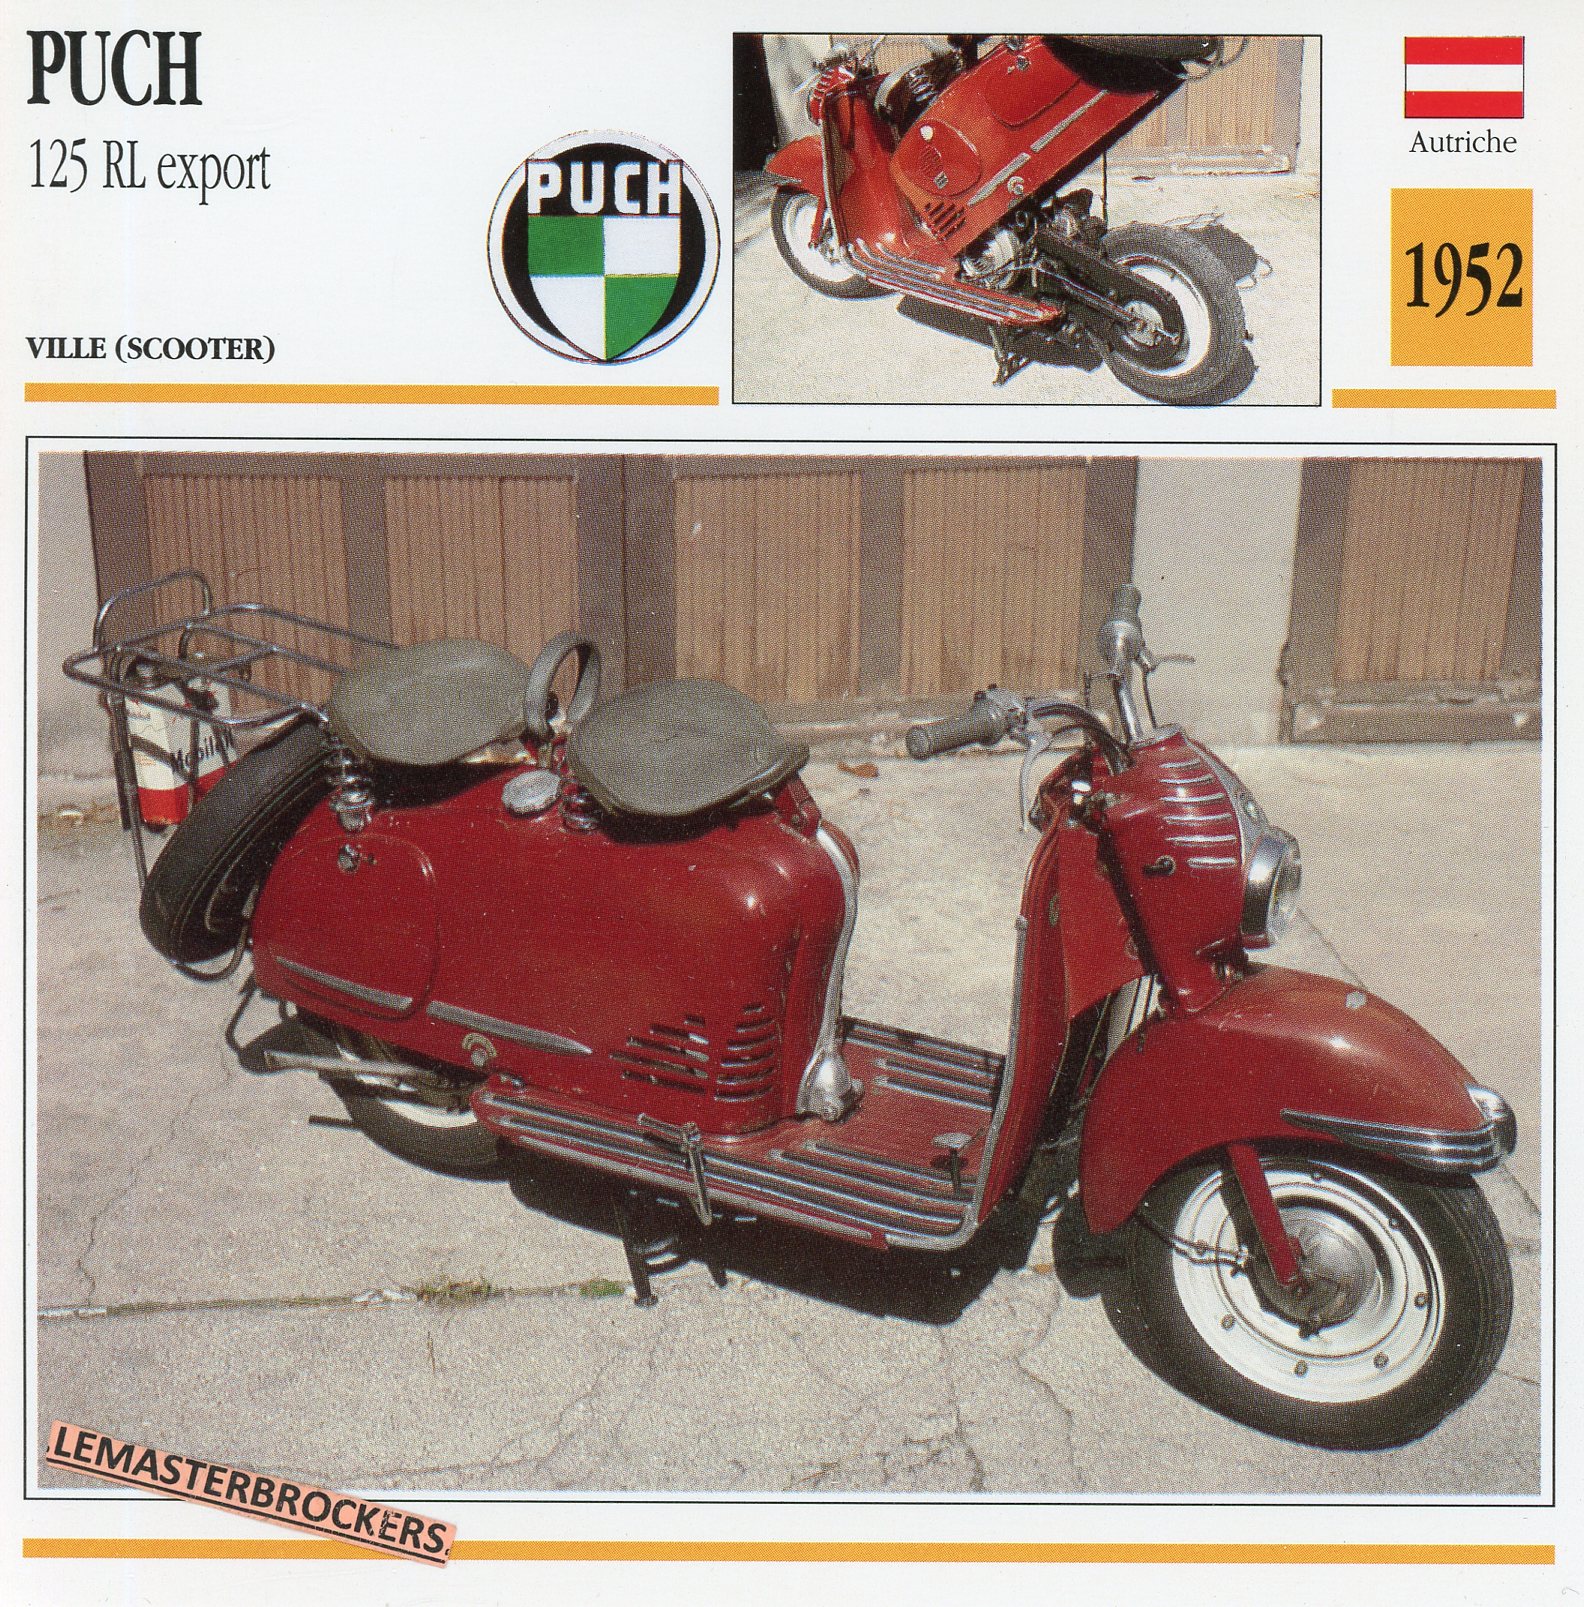 PUCH-125-EXPORT-1952-FICHE-SCOOTER-MOTORCYCLE-CARDS-ATLAS-LEMASTERBROCKERS